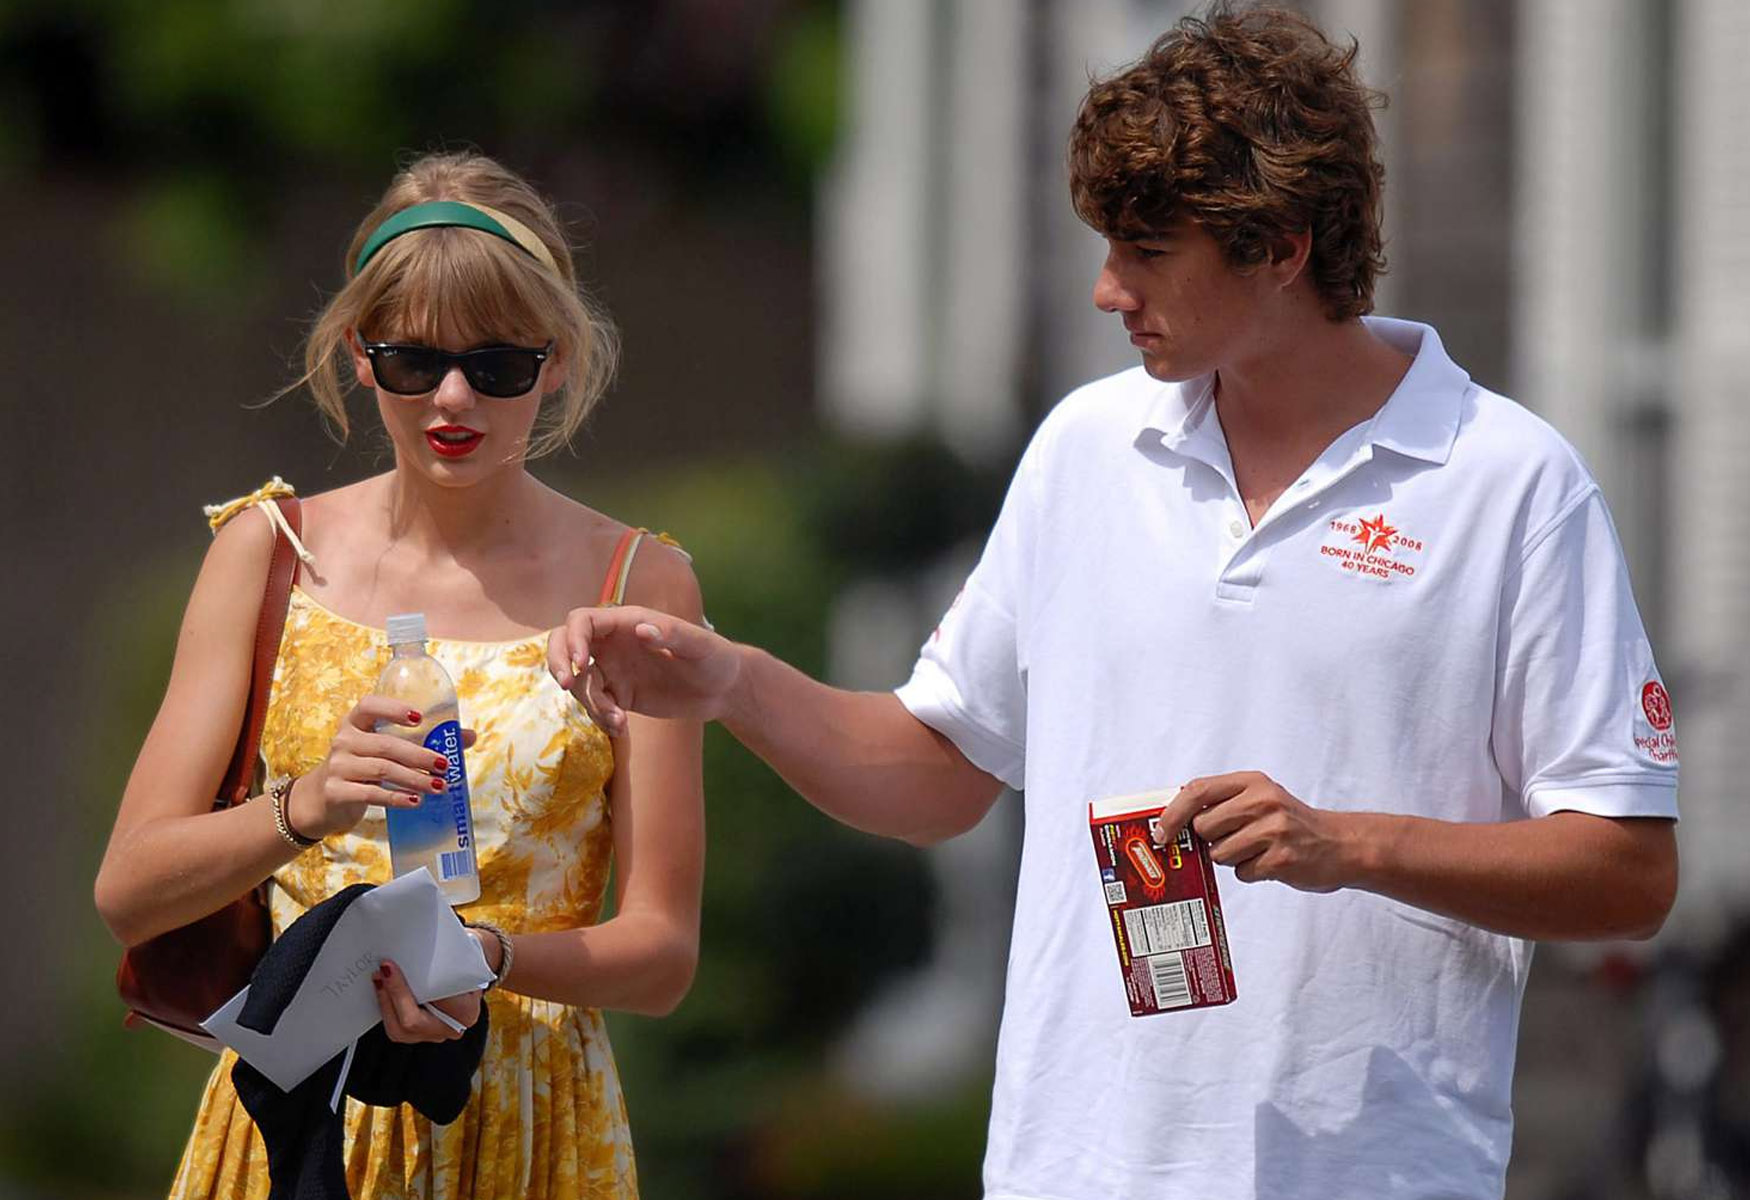 Conor Kennedy: From Taylor Swift’s Summer Fling To Political Legacy